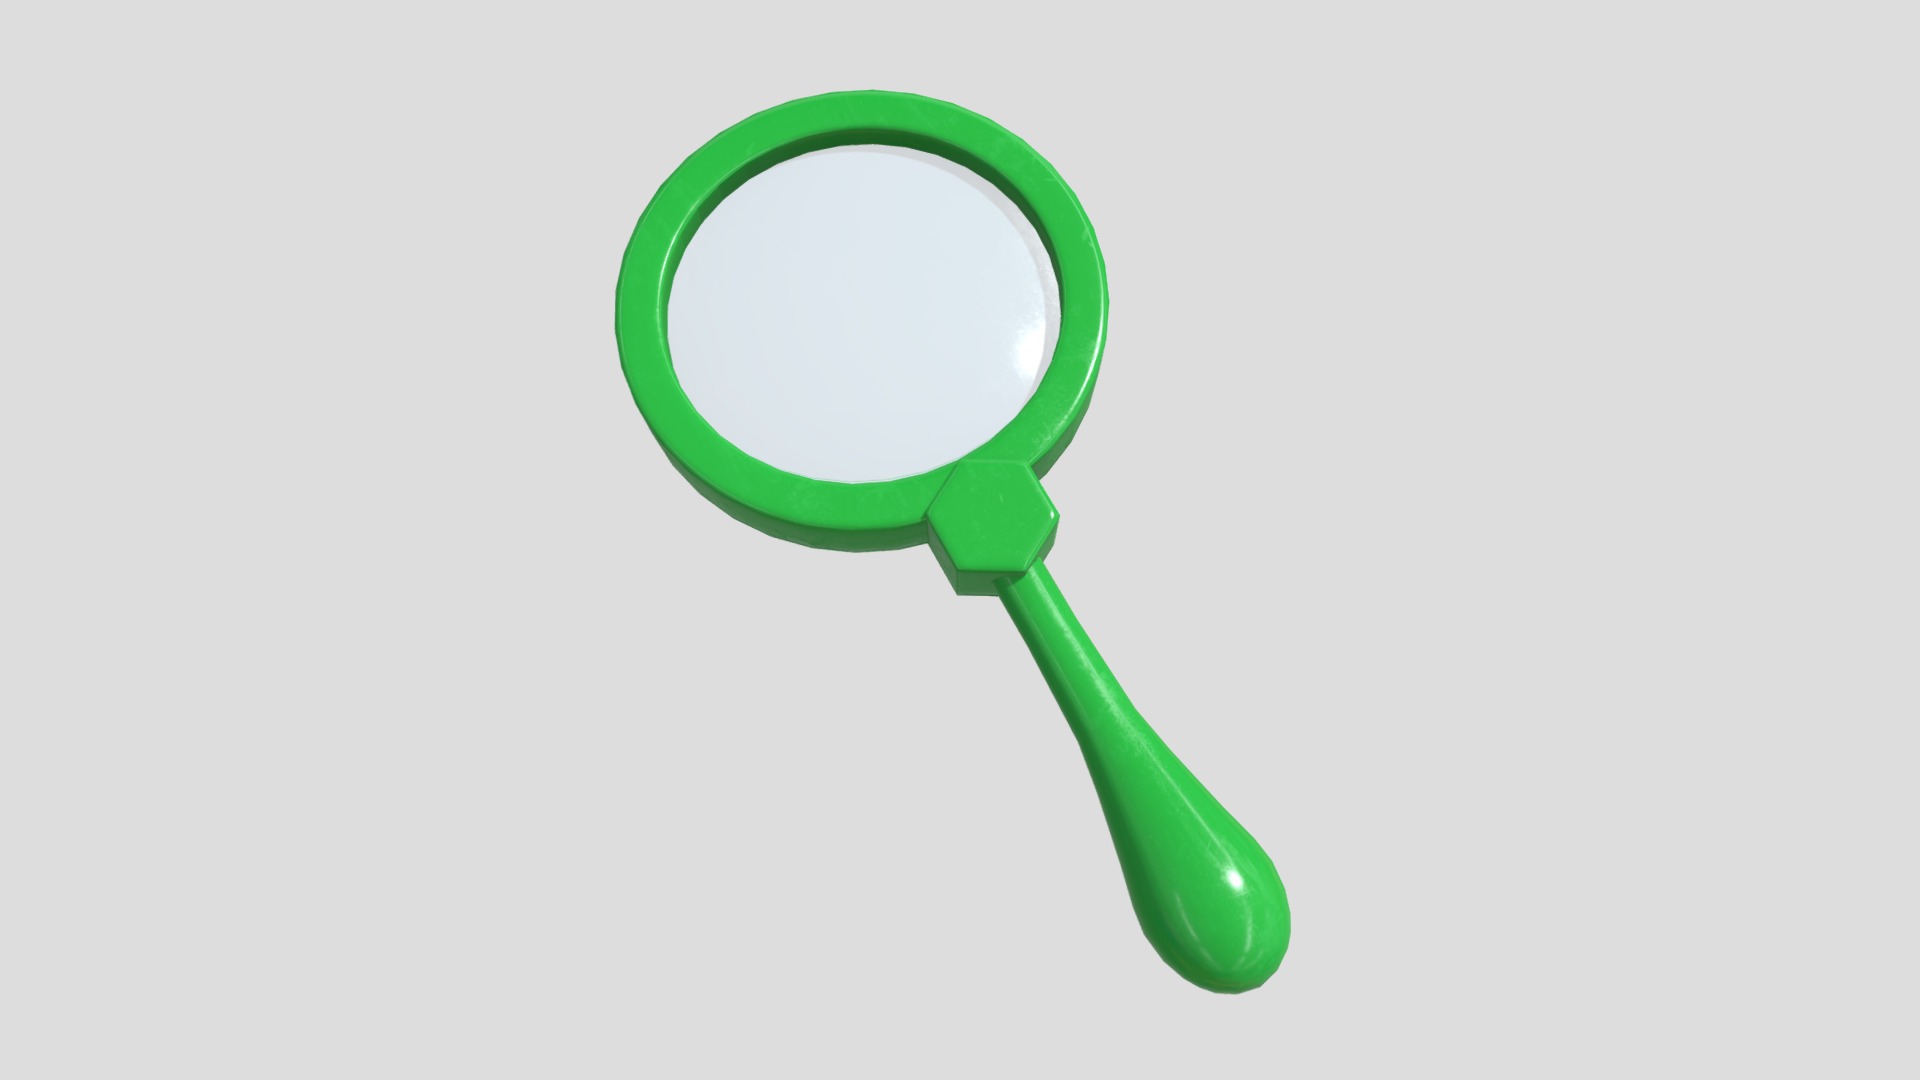 3D model Magnifying Glass 4 - This is a 3D model of the Magnifying Glass 4. The 3D model is about a green handled scissors.